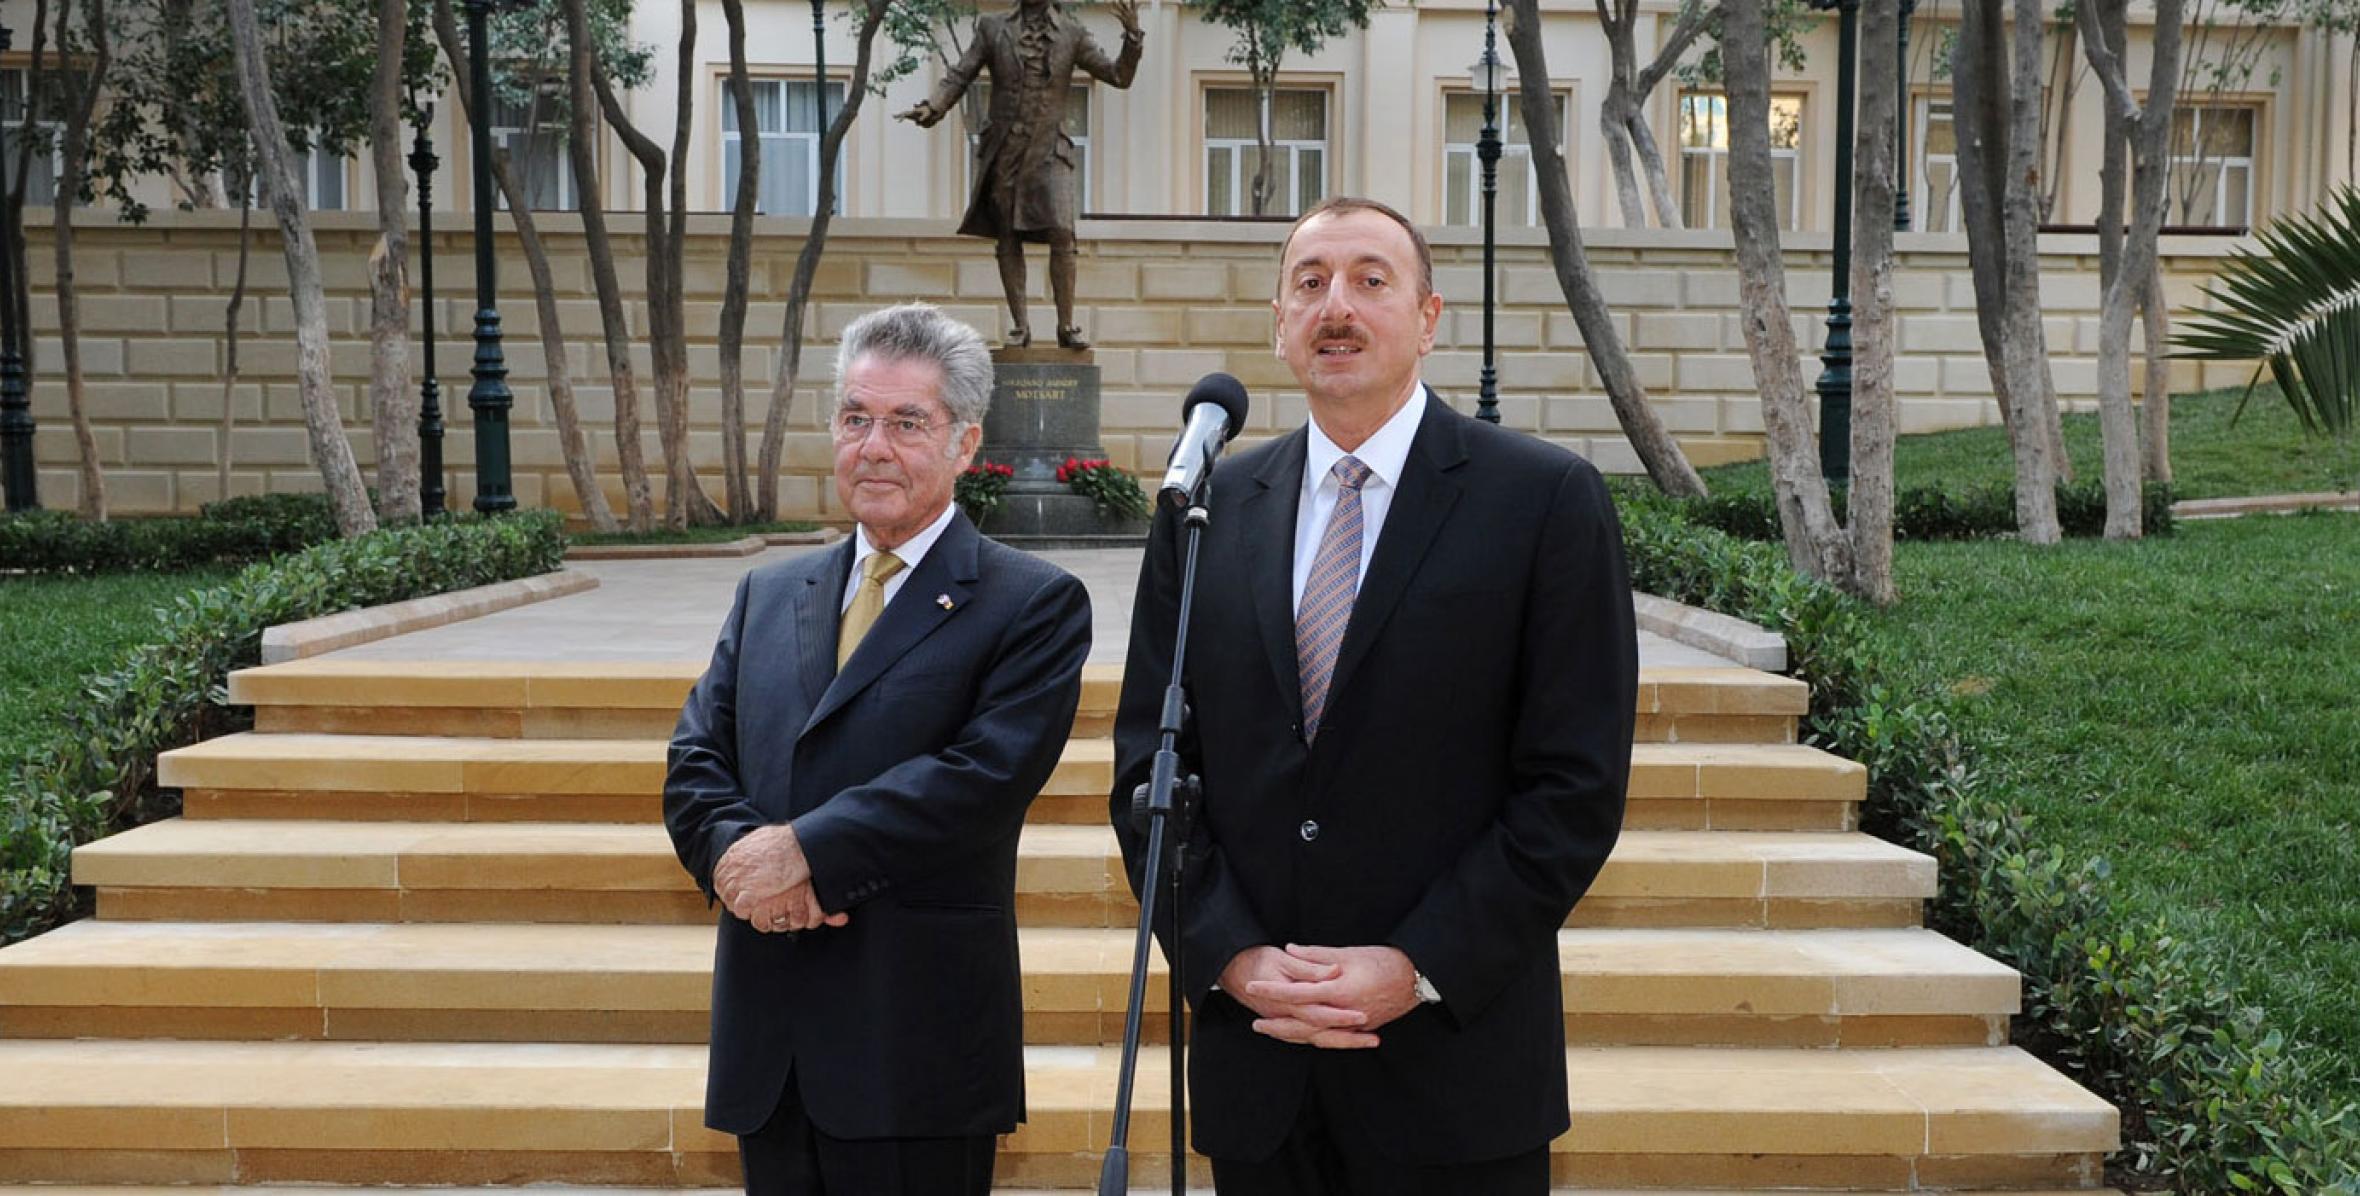 Speech by Ilham Aliyev at the ceremony to unveil a statue of brilliant composer Wolfgang Mozart